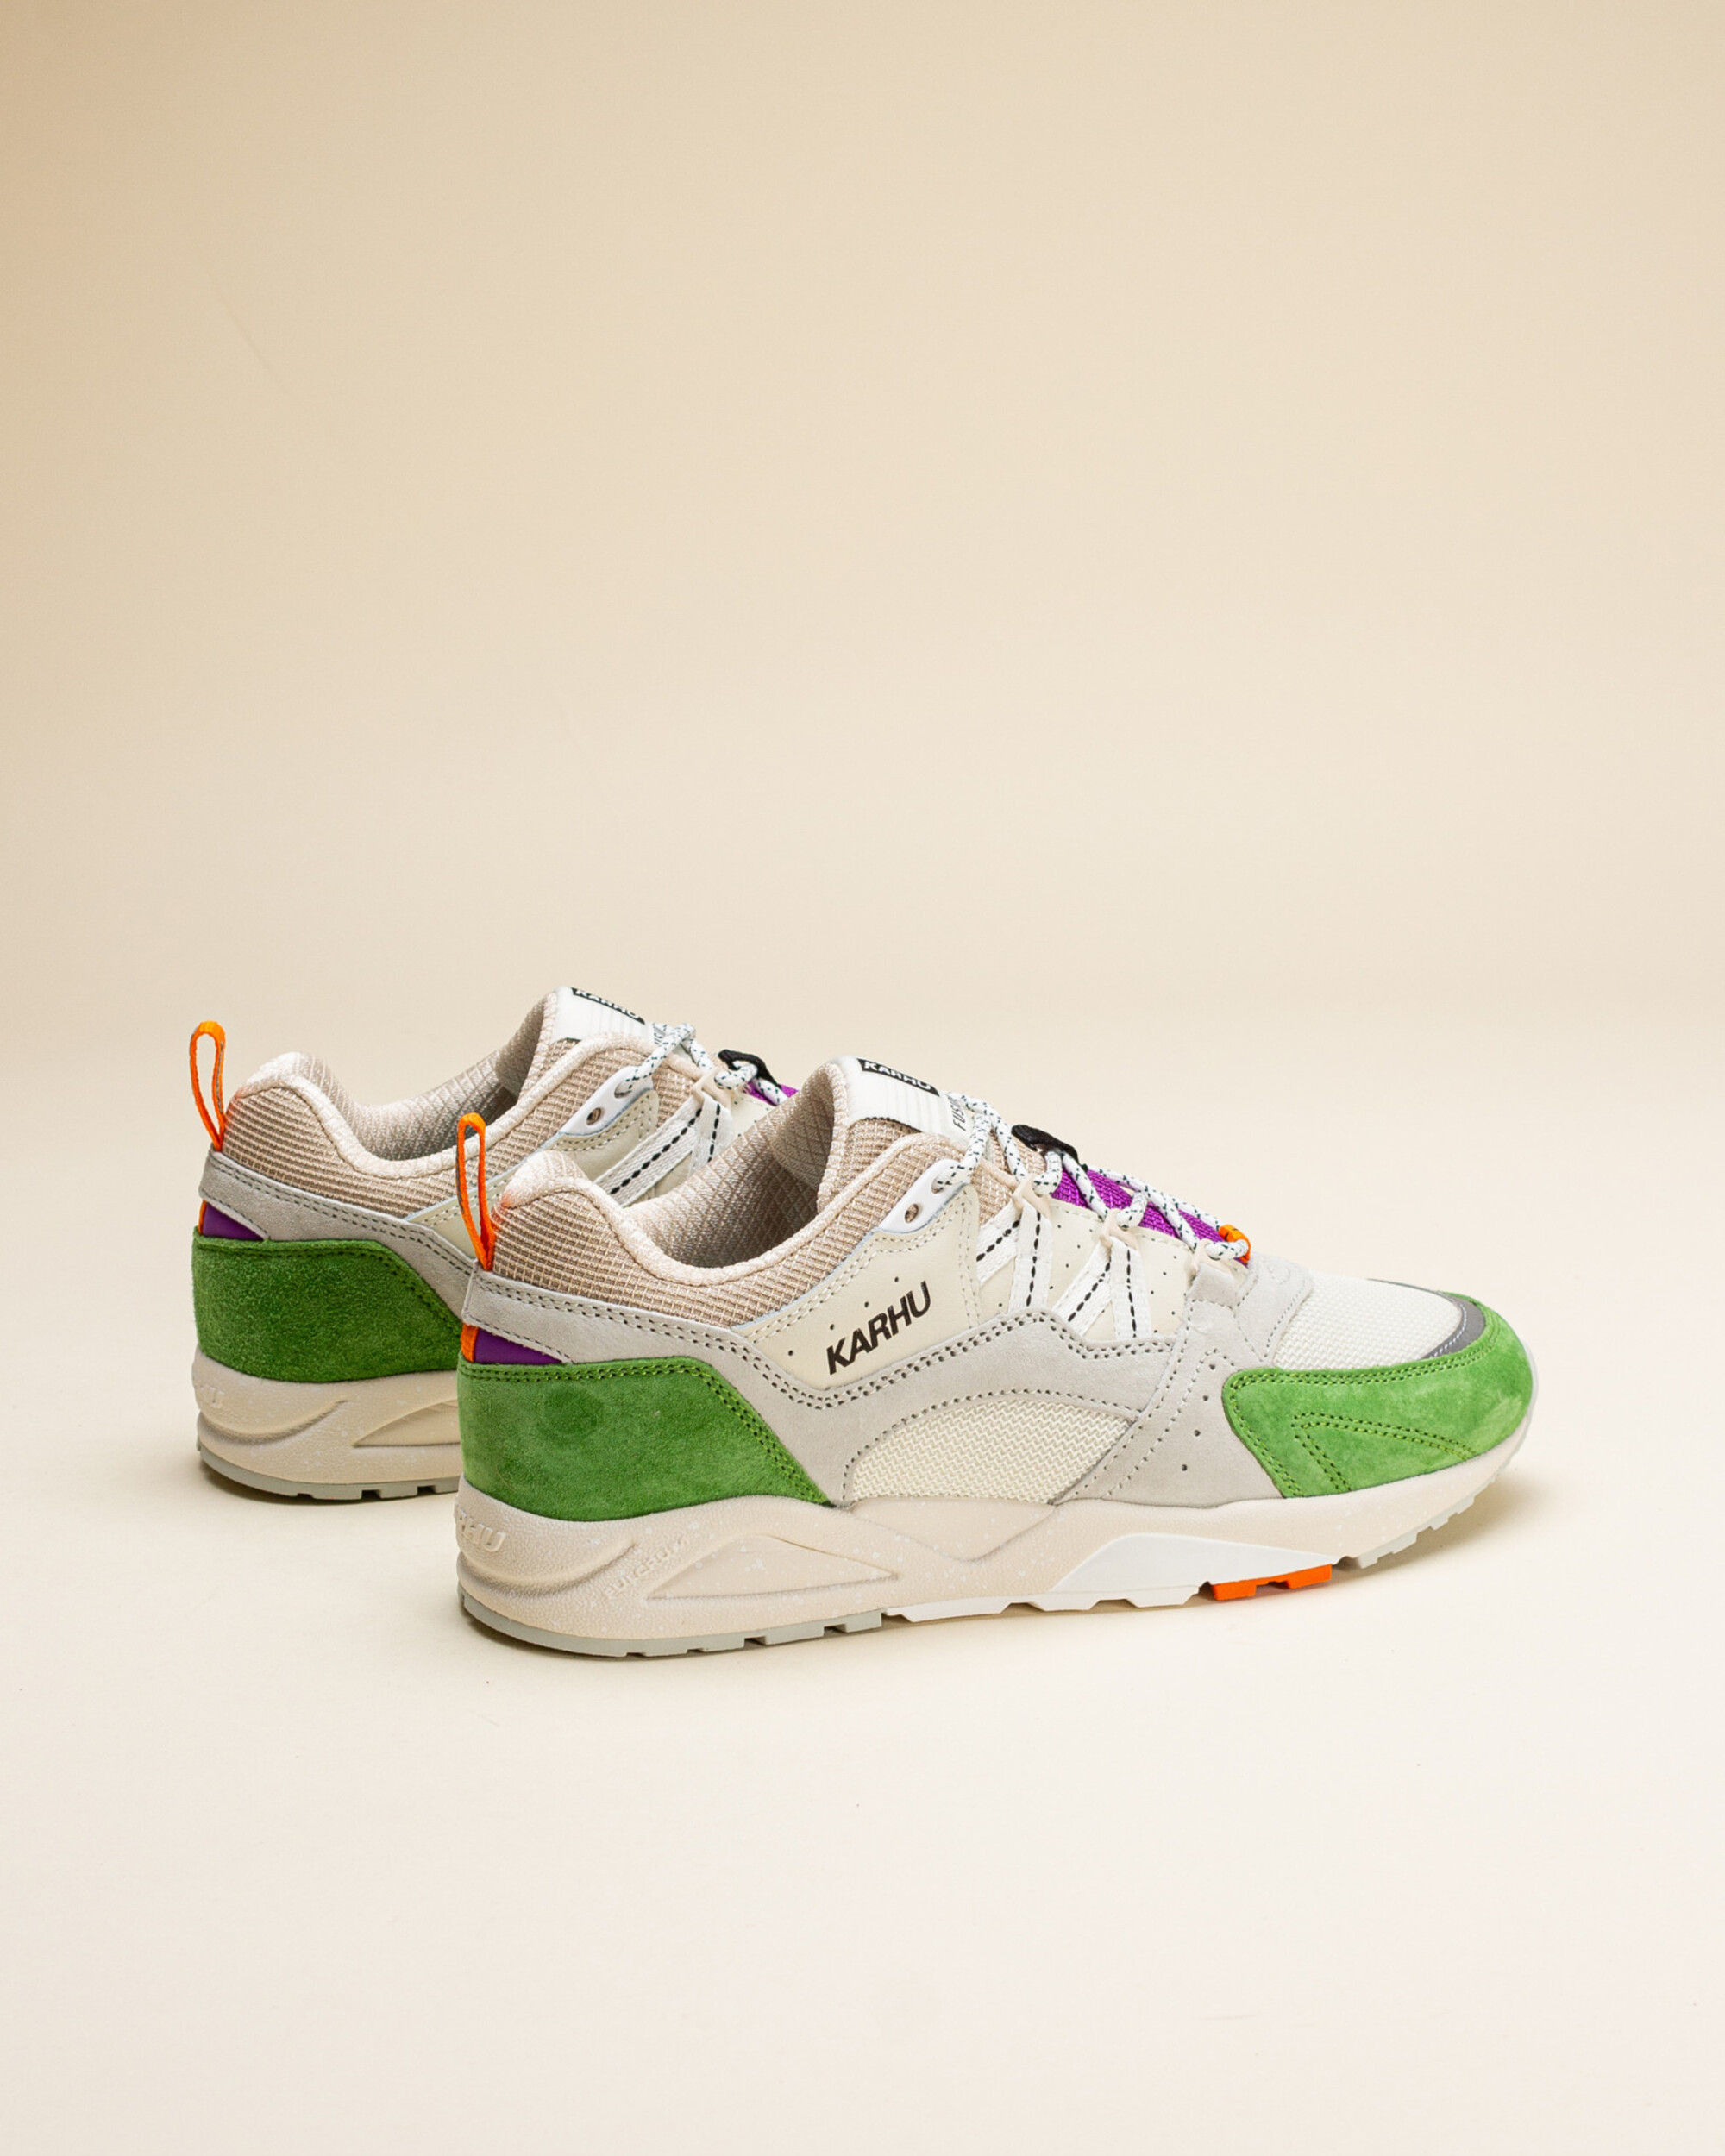 Karhu Fusion 2.0 "Flow State" Pack 2 - Piquant Green/Bright White